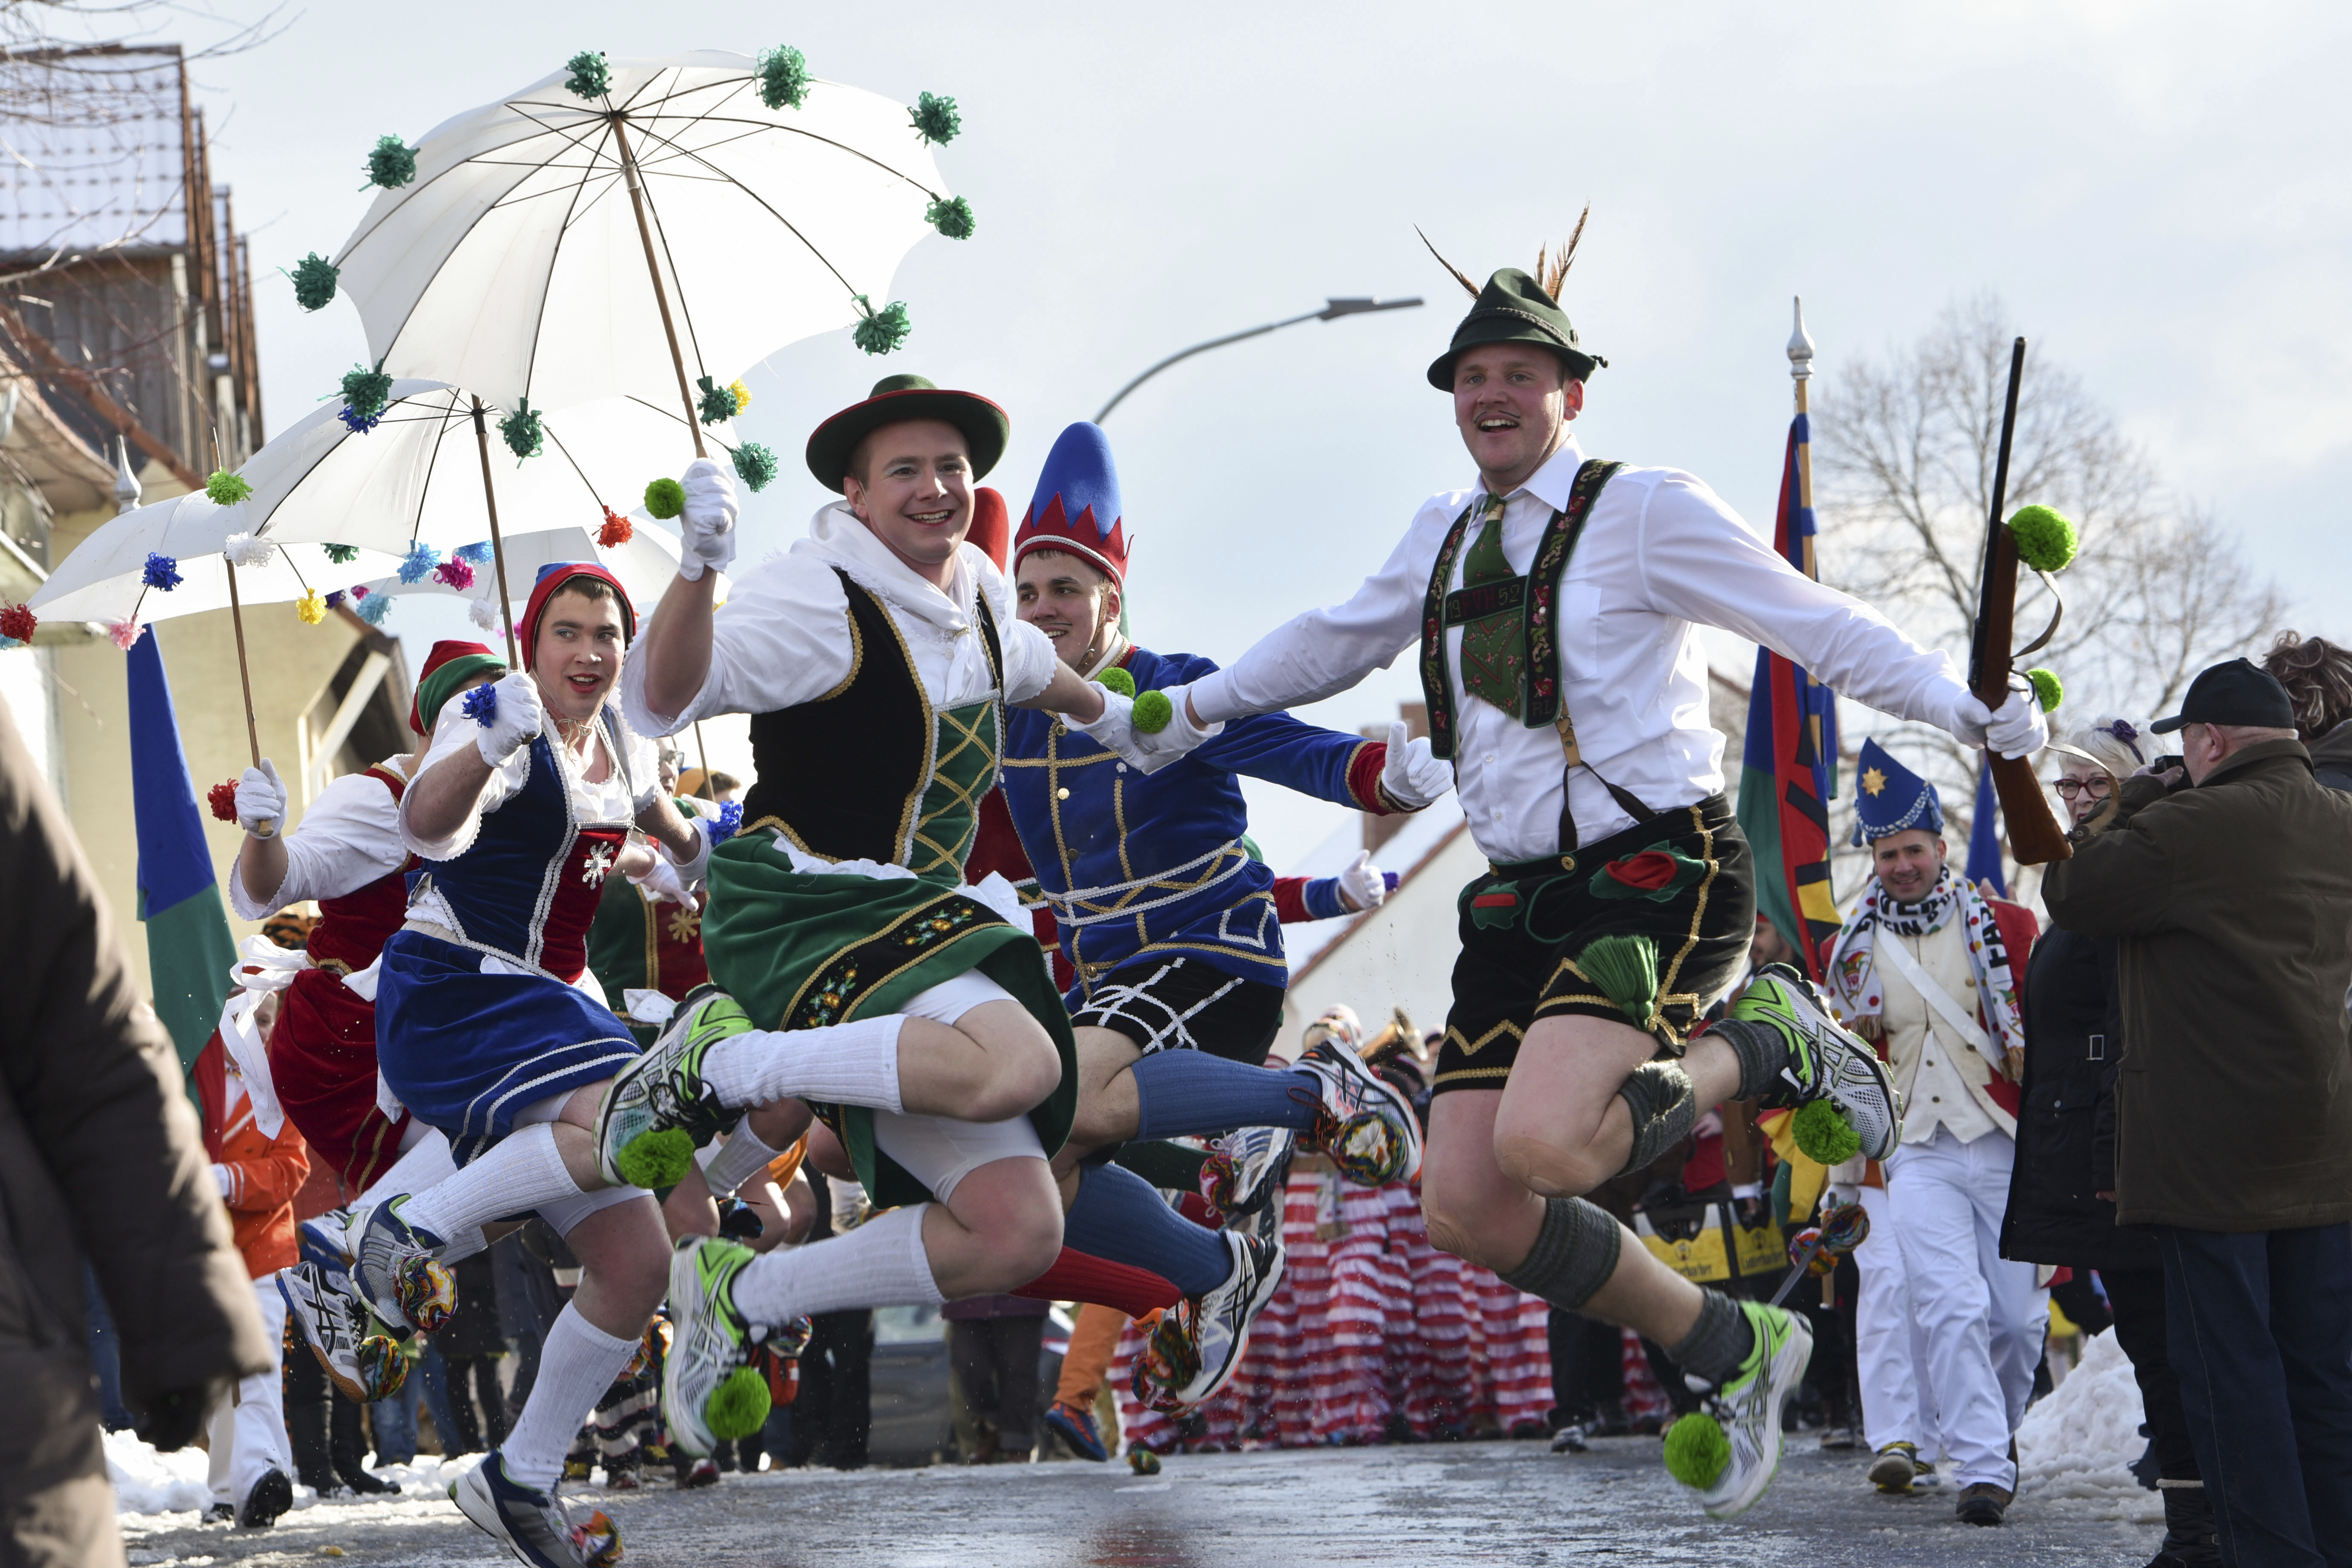 'Tiroler Paerchen' (lit. Tirol couples) jump up in the air during the parade in Herbstein, Germany, 12 February 2018. The 'Herbsteiner Springerzug' (lit. Herbstein jumping parade) is one of the most extraordinary carnival processions in Hesse. Photo by: Uwe Zucchi/picture-alliance/dpa/AP Images